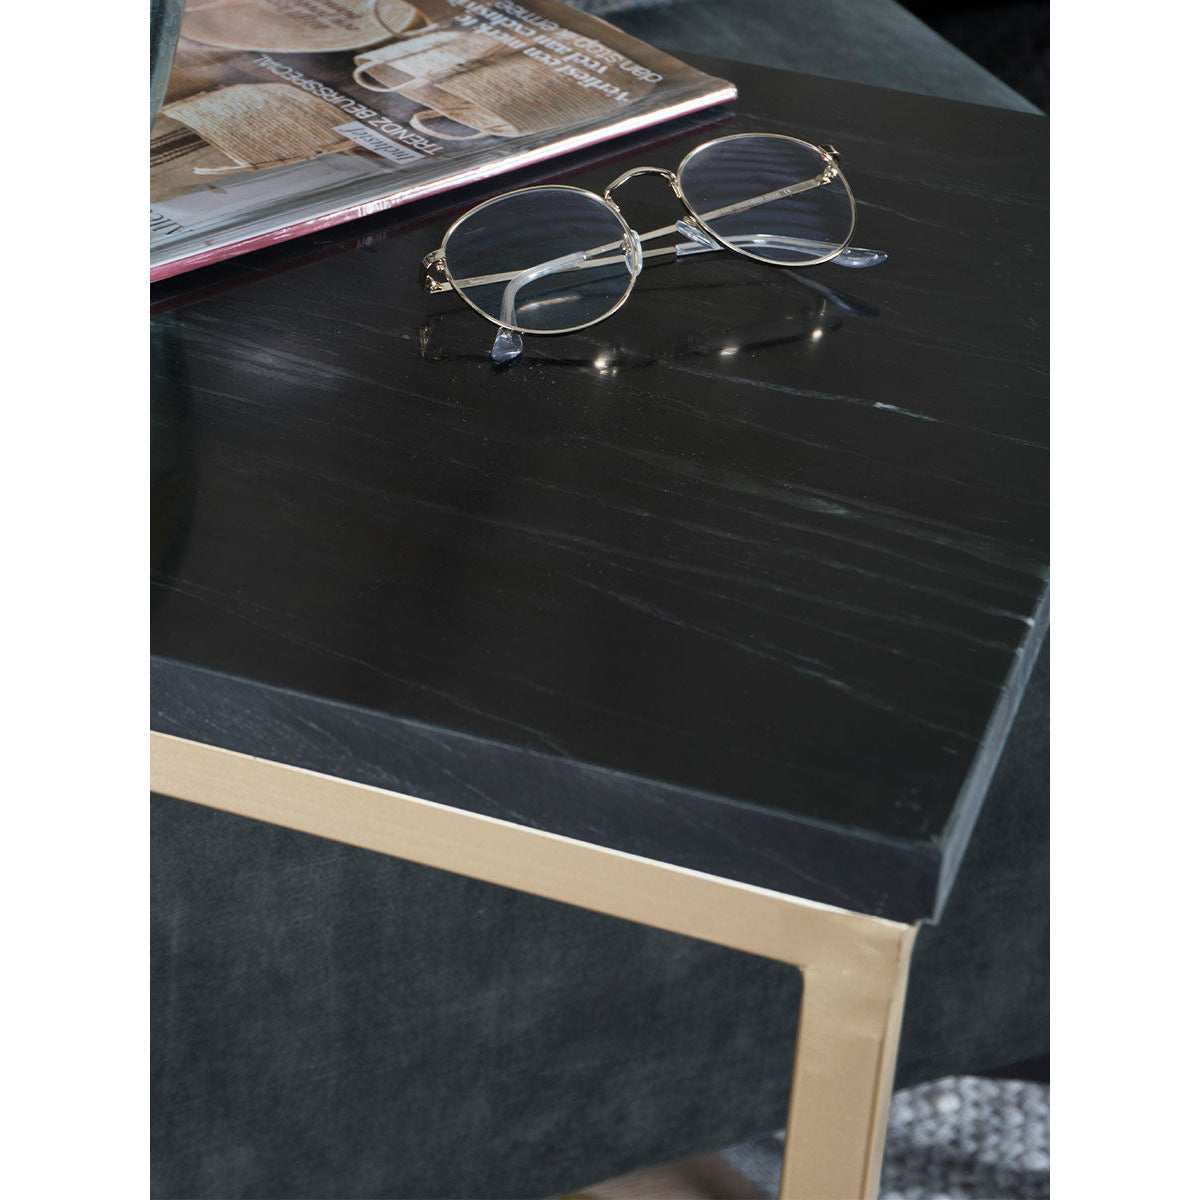 Laptop table Mitch Marble - Black/Gold